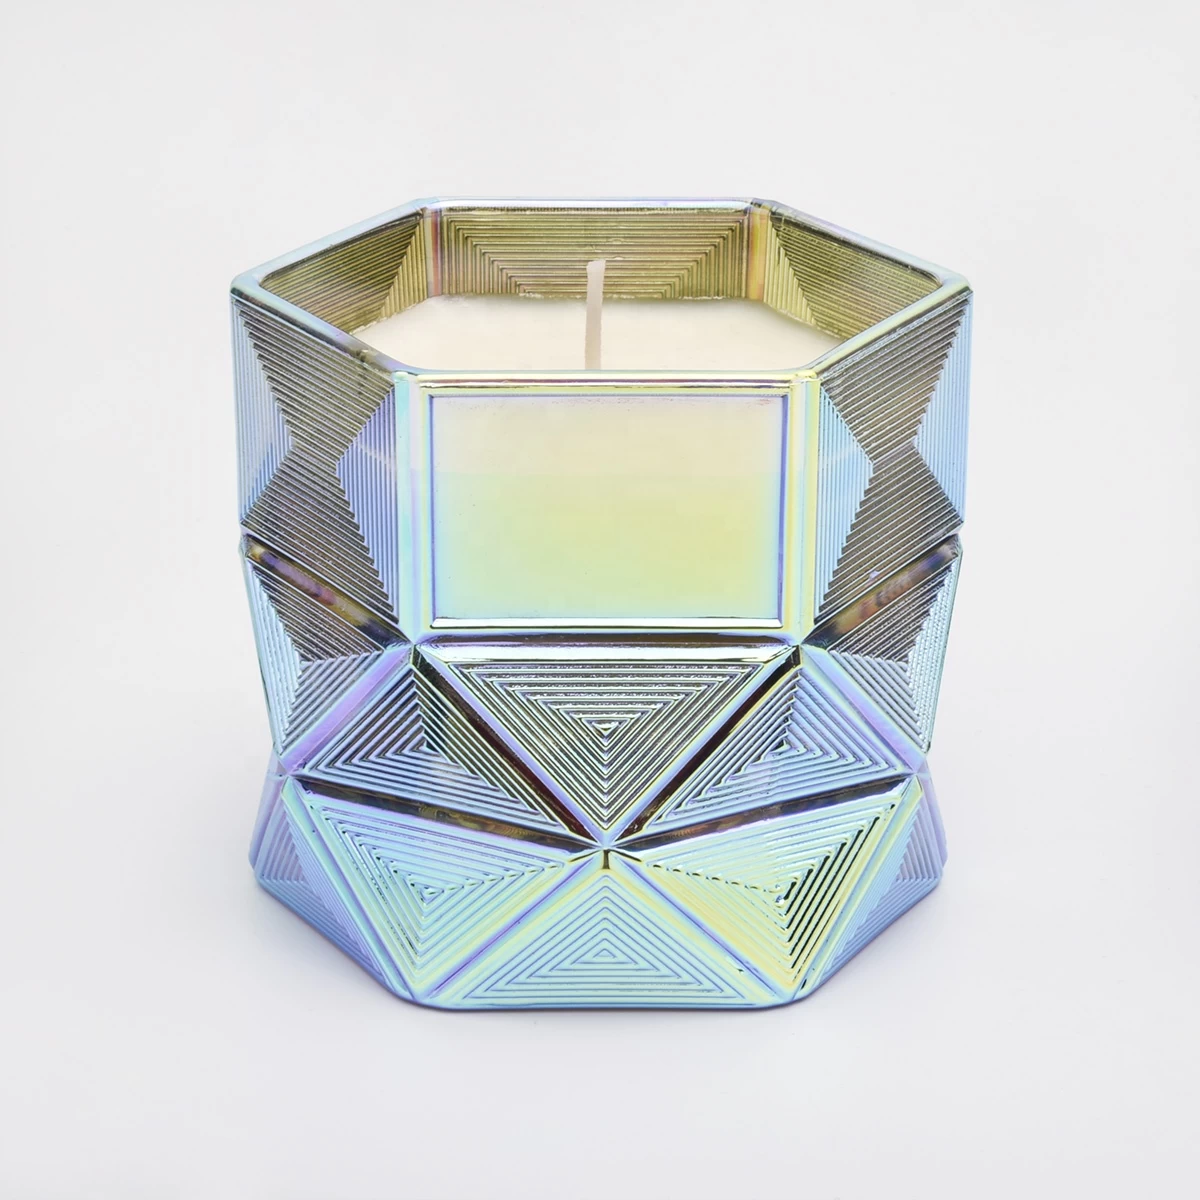 10oz 16oz 18oz Home decoration Hexagon glass candle holder containers